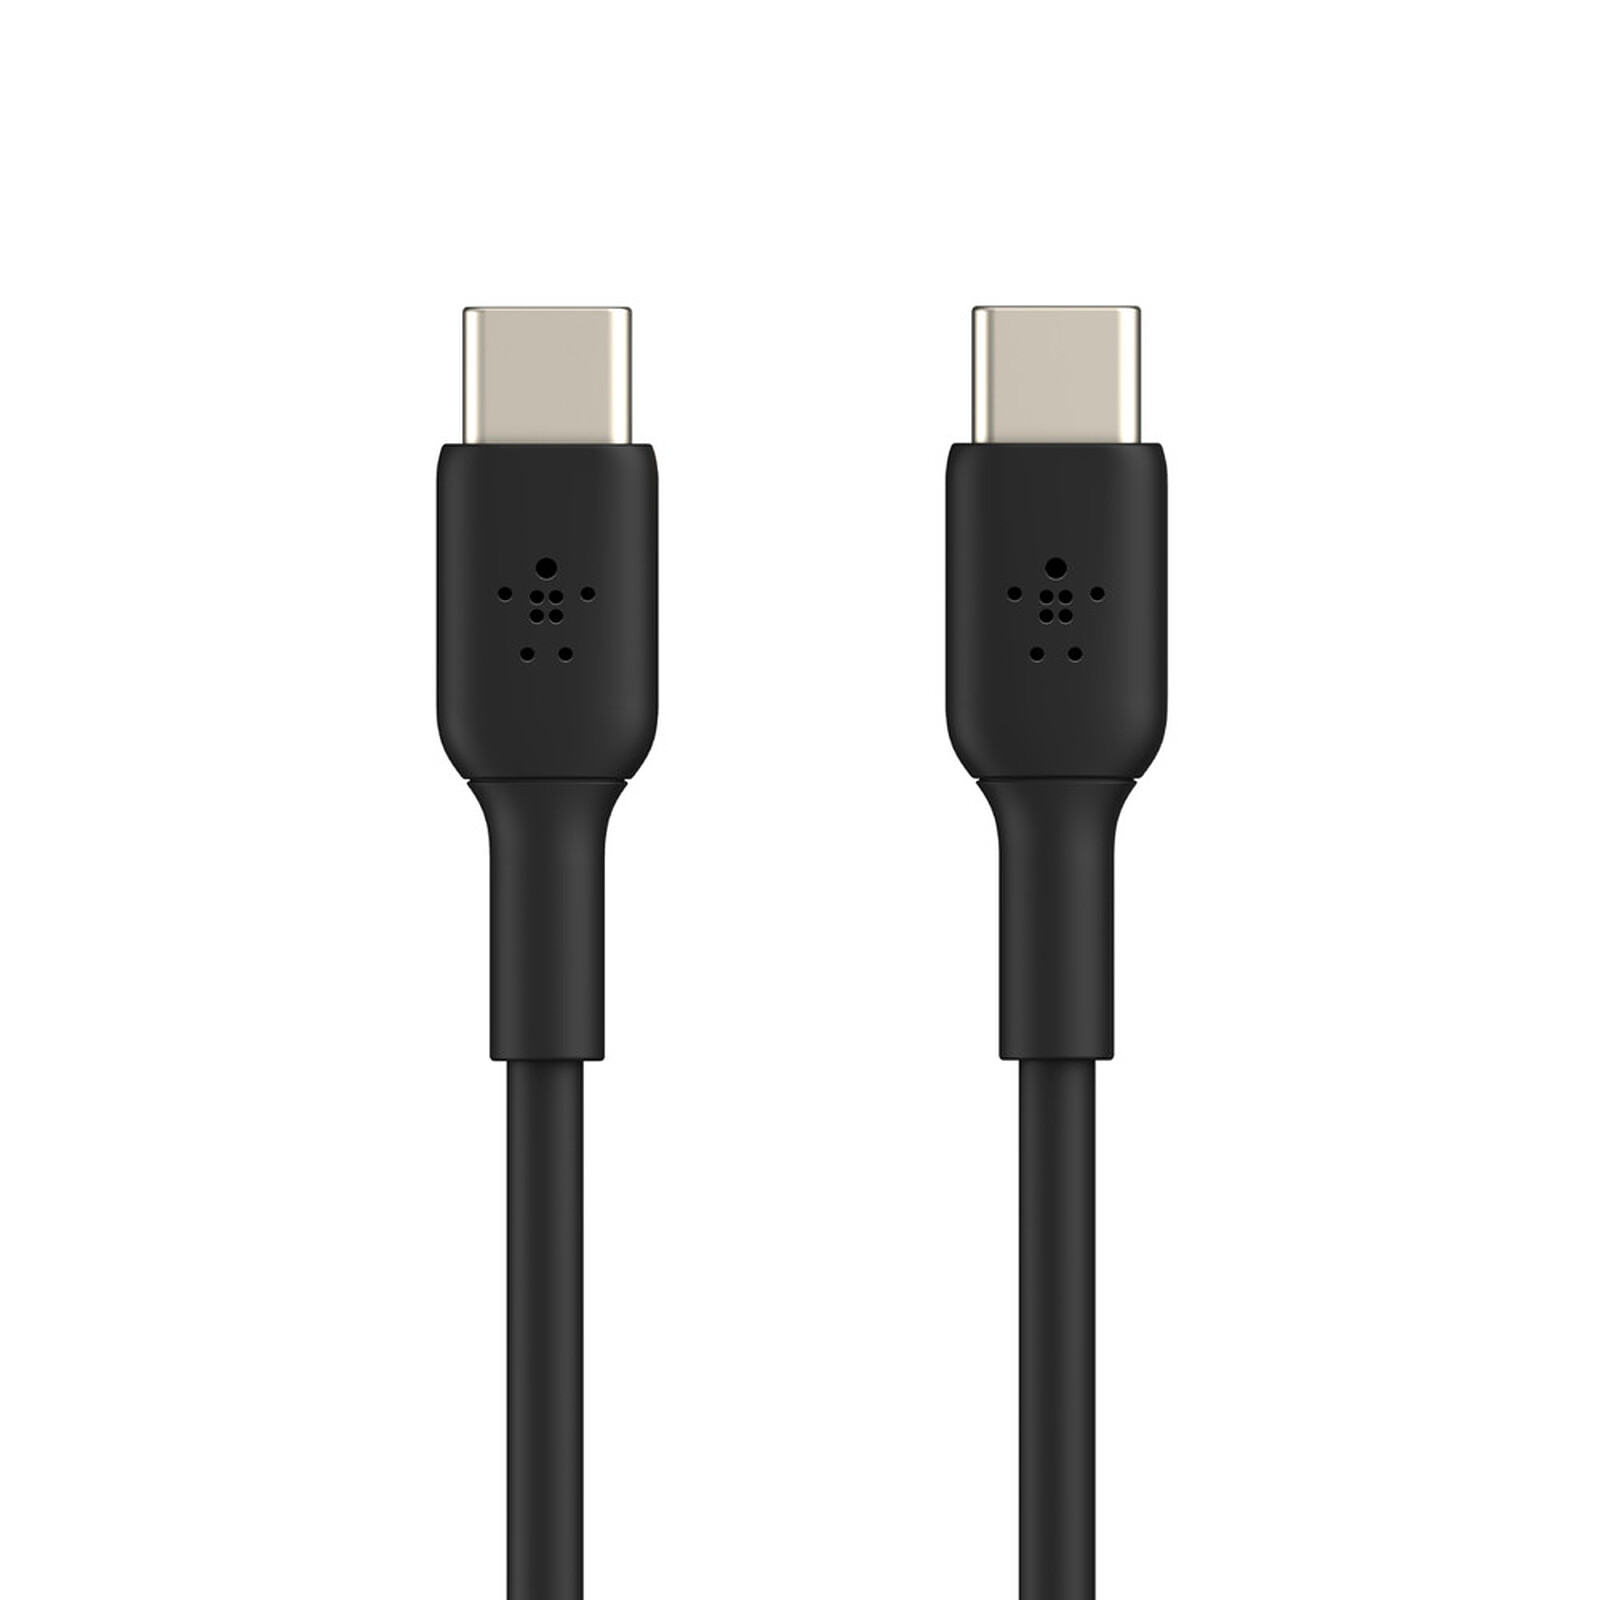 belkin pro series usb parallel printer cable